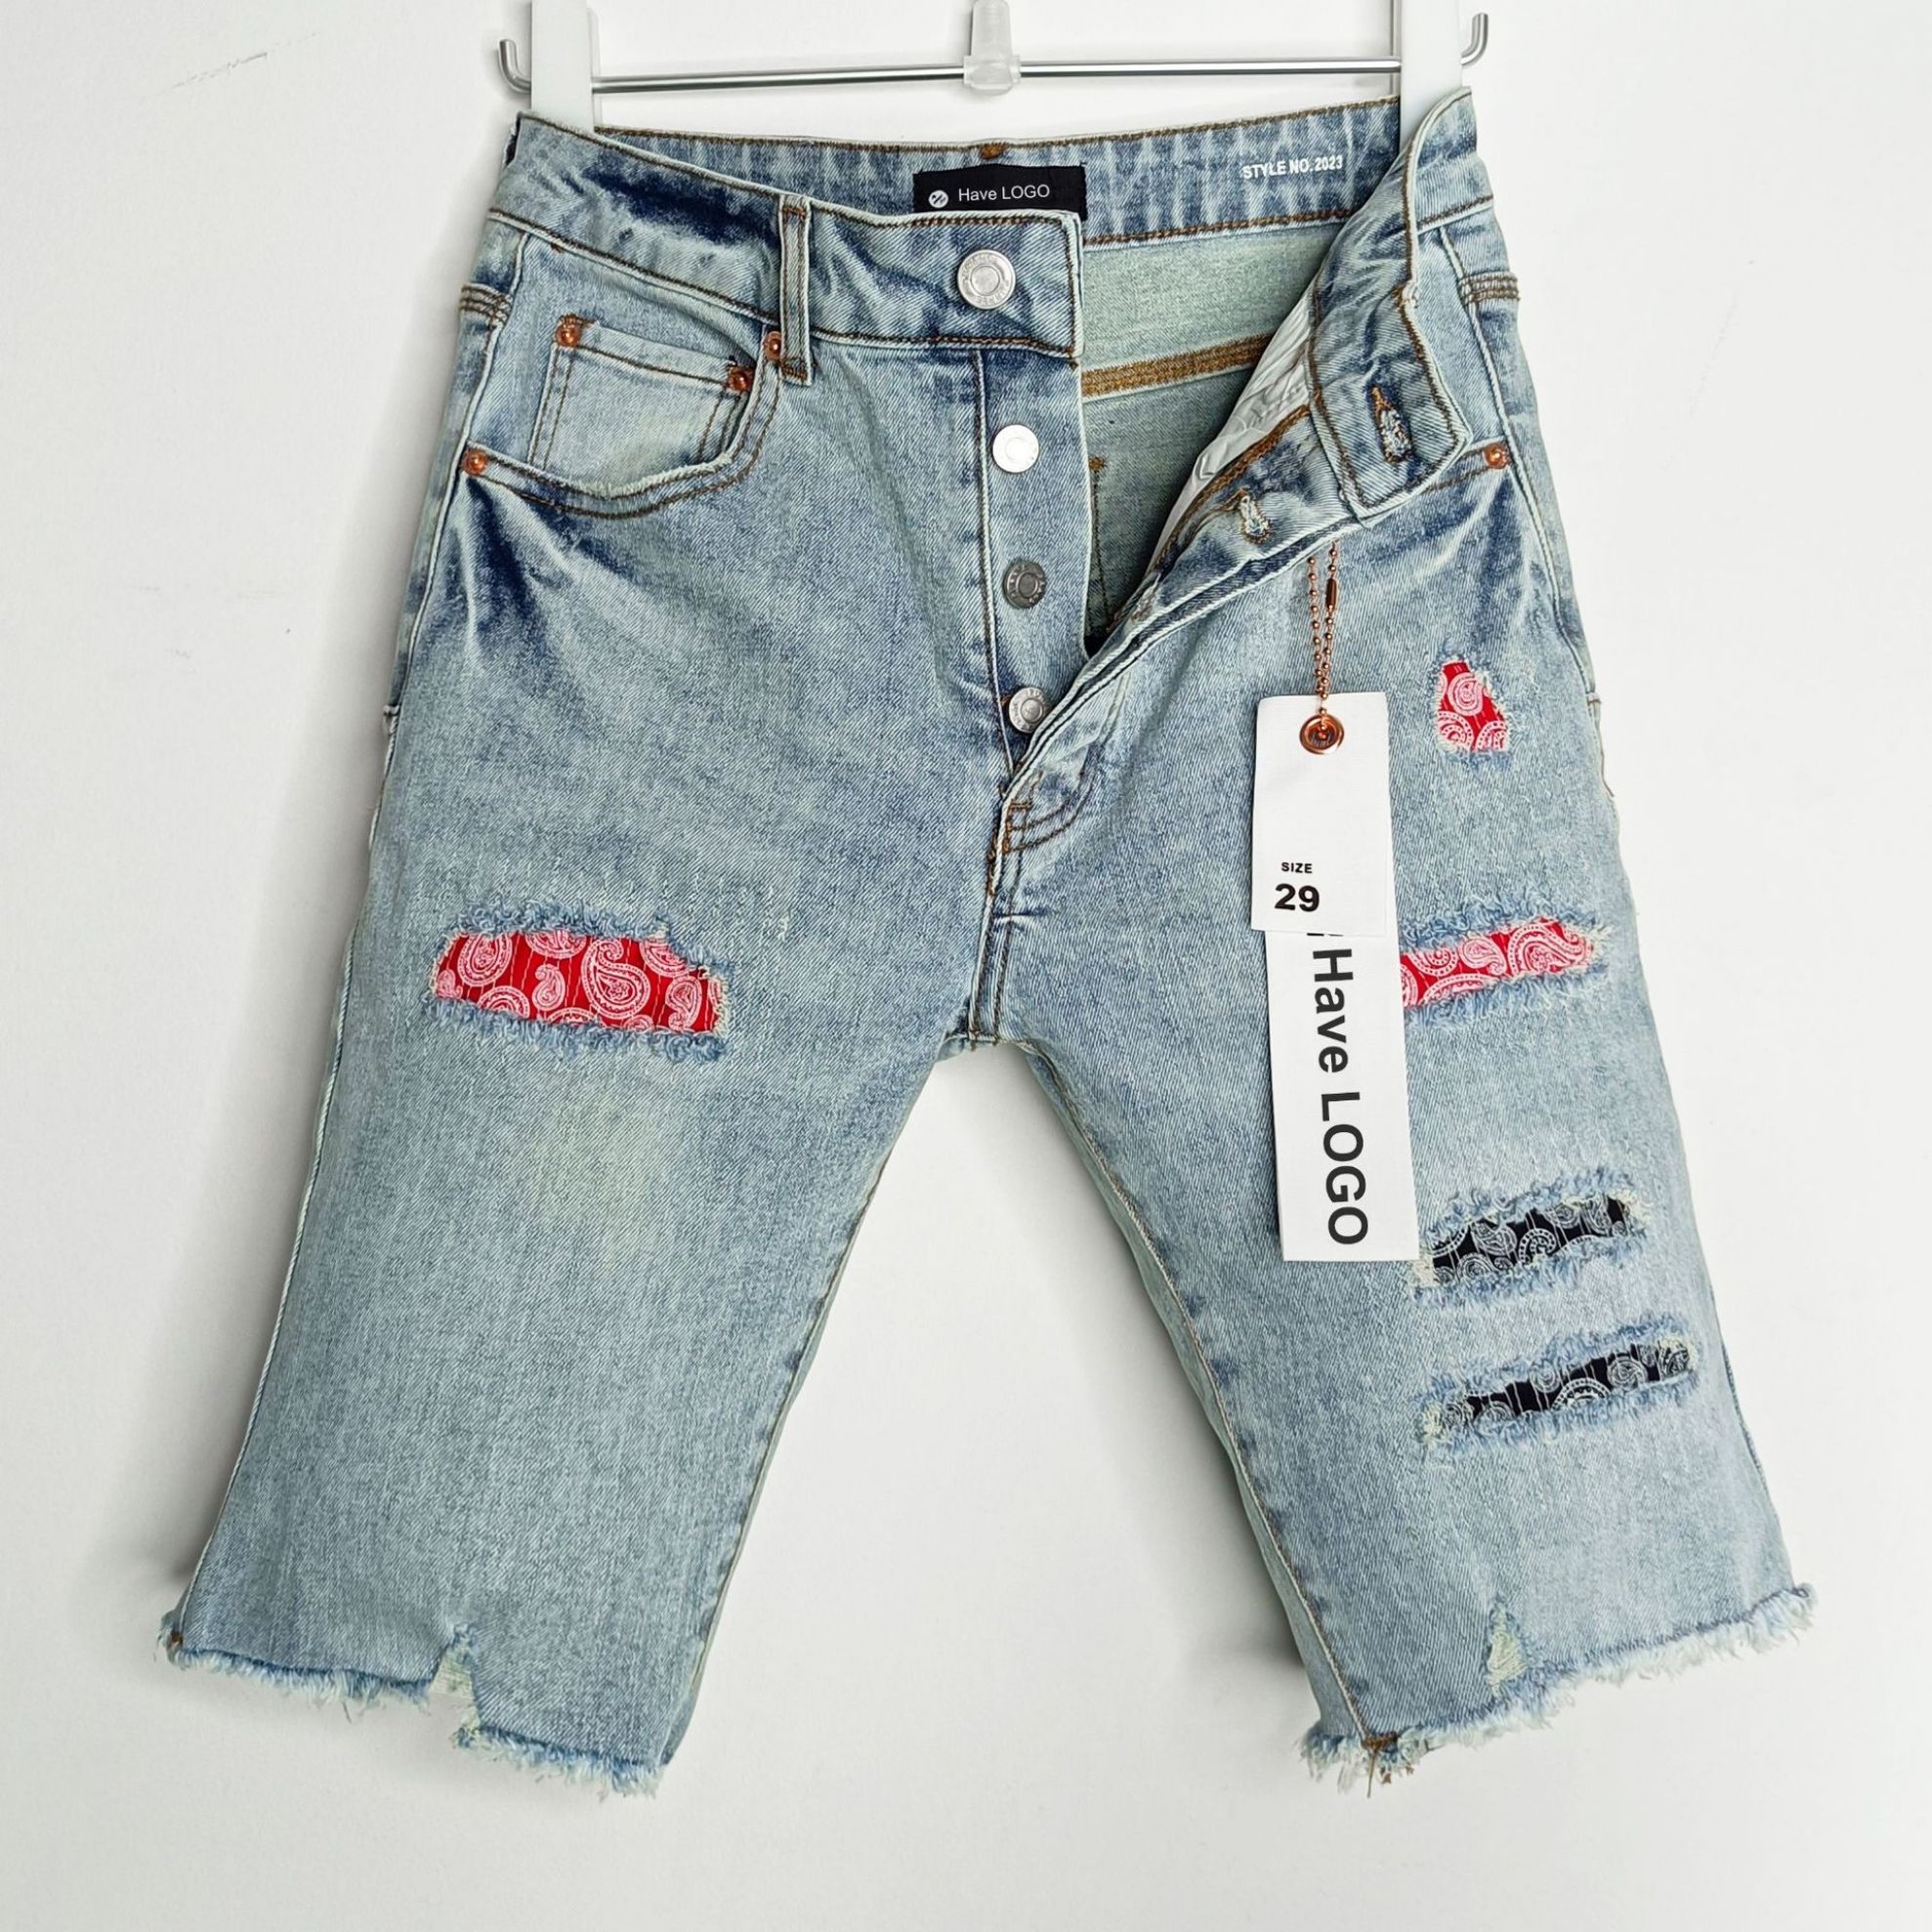 Jeans Shorts 816253